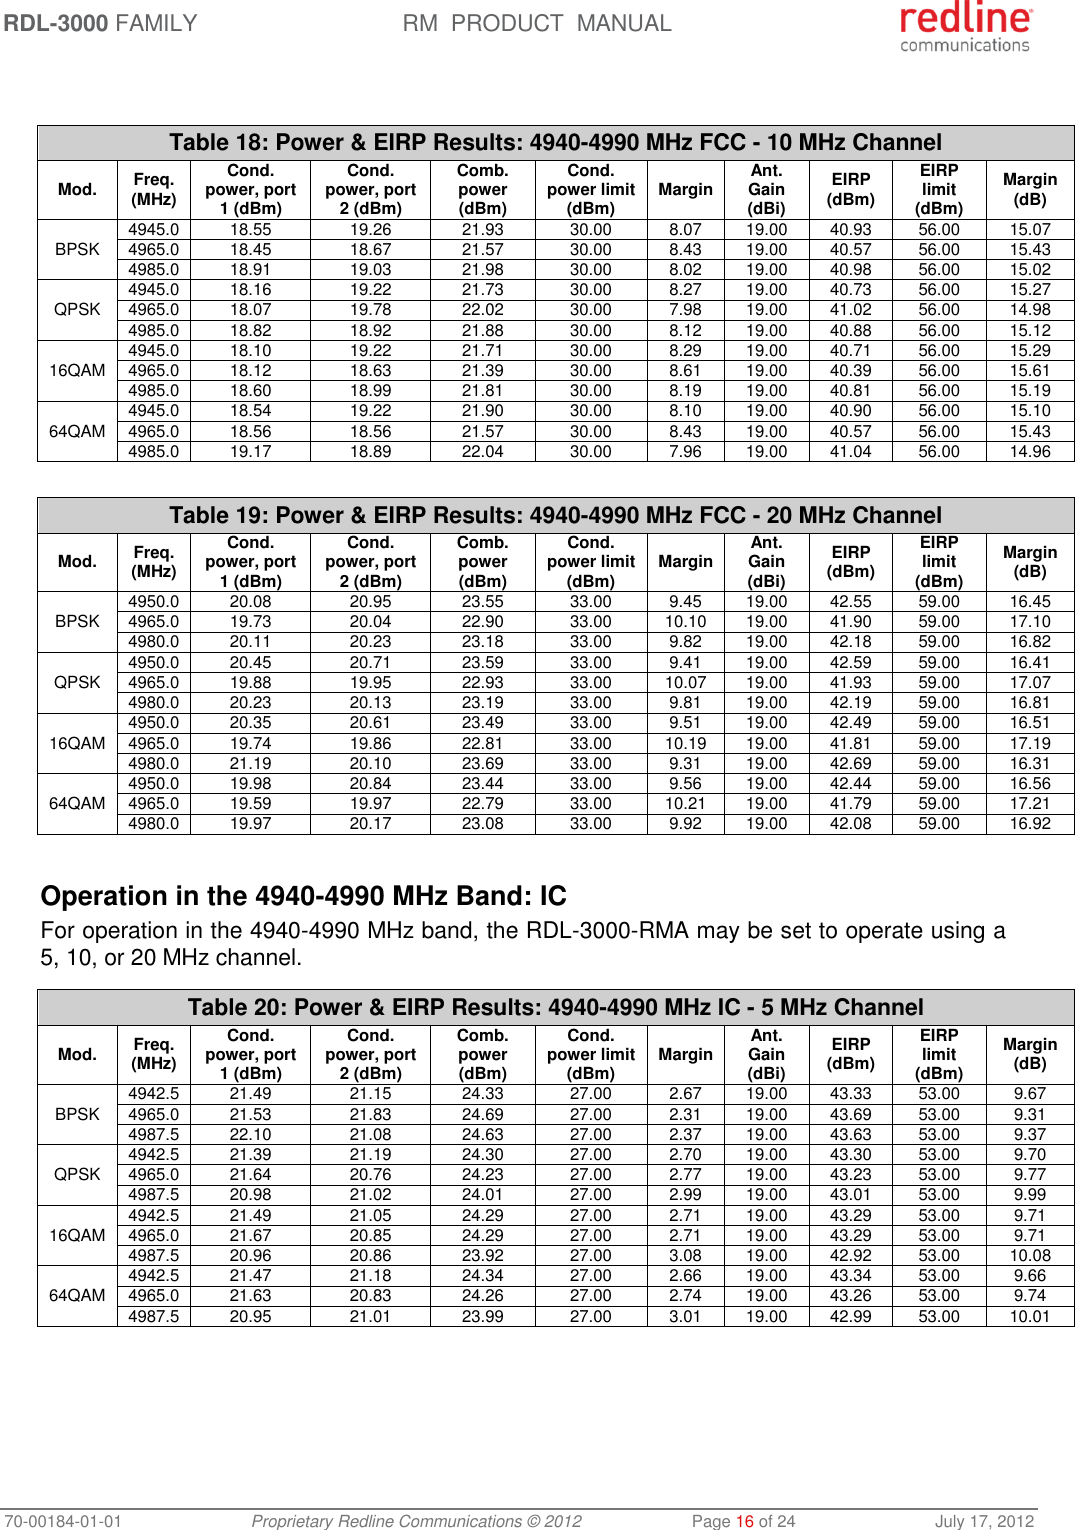 RDL-3000 FAMILY RM  PRODUCT  MANUAL 70-00184-01-01 Proprietary Redline Communications © 2012  Page 16 of 24  July 17, 2012   Table 18: Power &amp; EIRP Results: 4940-4990 MHz FCC - 10 MHz Channel Mod. Freq. (MHz) Cond. power, port 1 (dBm) Cond. power, port 2 (dBm) Comb. power (dBm) Cond. power limit (dBm) Margin Ant. Gain (dBi) EIRP (dBm) EIRP limit (dBm) Margin (dB) BPSK   4945.0 18.55 19.26 21.93 30.00 8.07 19.00 40.93 56.00 15.07 4965.0 18.45 18.67 21.57 30.00 8.43 19.00 40.57 56.00 15.43 4985.0 18.91 19.03 21.98 30.00 8.02 19.00 40.98 56.00 15.02 QPSK  4945.0 18.16 19.22 21.73 30.00 8.27 19.00 40.73 56.00 15.27 4965.0 18.07 19.78 22.02 30.00 7.98 19.00 41.02 56.00 14.98 4985.0 18.82 18.92 21.88 30.00 8.12 19.00 40.88 56.00 15.12 16QAM  4945.0 18.10 19.22 21.71 30.00 8.29 19.00 40.71 56.00 15.29 4965.0 18.12 18.63 21.39 30.00 8.61 19.00 40.39 56.00 15.61 4985.0 18.60 18.99 21.81 30.00 8.19 19.00 40.81 56.00 15.19 64QAM  4945.0 18.54 19.22 21.90 30.00 8.10 19.00 40.90 56.00 15.10 4965.0 18.56 18.56 21.57 30.00 8.43 19.00 40.57 56.00 15.43 4985.0 19.17 18.89 22.04 30.00 7.96 19.00 41.04 56.00 14.96  Table 19: Power &amp; EIRP Results: 4940-4990 MHz FCC - 20 MHz Channel Mod. Freq. (MHz) Cond. power, port 1 (dBm) Cond. power, port 2 (dBm) Comb. power (dBm) Cond. power limit (dBm) Margin Ant. Gain (dBi) EIRP (dBm) EIRP limit (dBm) Margin (dB) BPSK   4950.0 20.08 20.95 23.55 33.00 9.45 19.00 42.55 59.00 16.45 4965.0 19.73 20.04 22.90 33.00 10.10 19.00 41.90 59.00 17.10 4980.0 20.11 20.23 23.18 33.00 9.82 19.00 42.18 59.00 16.82 QPSK  4950.0 20.45 20.71 23.59 33.00 9.41 19.00 42.59 59.00 16.41 4965.0 19.88 19.95 22.93 33.00 10.07 19.00 41.93 59.00 17.07 4980.0 20.23 20.13 23.19 33.00 9.81 19.00 42.19 59.00 16.81 16QAM  4950.0 20.35 20.61 23.49 33.00 9.51 19.00 42.49 59.00 16.51 4965.0 19.74 19.86 22.81 33.00 10.19 19.00 41.81 59.00 17.19 4980.0 21.19 20.10 23.69 33.00 9.31 19.00 42.69 59.00 16.31 64QAM  4950.0 19.98 20.84 23.44 33.00 9.56 19.00 42.44 59.00 16.56 4965.0 19.59 19.97 22.79 33.00 10.21 19.00 41.79 59.00 17.21 4980.0 19.97 20.17 23.08 33.00 9.92 19.00 42.08 59.00 16.92   Operation in the 4940-4990 MHz Band: IC For operation in the 4940-4990 MHz band, the RDL-3000-RMA may be set to operate using a 5, 10, or 20 MHz channel.  Table 20: Power &amp; EIRP Results: 4940-4990 MHz IC - 5 MHz Channel Mod. Freq. (MHz) Cond. power, port 1 (dBm) Cond. power, port 2 (dBm) Comb. power (dBm) Cond. power limit (dBm) Margin Ant. Gain (dBi) EIRP (dBm) EIRP limit (dBm) Margin (dB) BPSK   4942.5 21.49 21.15 24.33 27.00 2.67 19.00 43.33 53.00 9.67 4965.0 21.53 21.83 24.69 27.00 2.31 19.00 43.69 53.00 9.31 4987.5 22.10 21.08 24.63 27.00 2.37 19.00 43.63 53.00 9.37 QPSK  4942.5 21.39 21.19 24.30 27.00 2.70 19.00 43.30 53.00 9.70 4965.0 21.64 20.76 24.23 27.00 2.77 19.00 43.23 53.00 9.77 4987.5 20.98 21.02 24.01 27.00 2.99 19.00 43.01 53.00 9.99 16QAM  4942.5 21.49 21.05 24.29 27.00 2.71 19.00 43.29 53.00 9.71 4965.0 21.67 20.85 24.29 27.00 2.71 19.00 43.29 53.00 9.71 4987.5 20.96 20.86 23.92 27.00 3.08 19.00 42.92 53.00 10.08 64QAM  4942.5 21.47 21.18 24.34 27.00 2.66 19.00 43.34 53.00 9.66 4965.0 21.63 20.83 24.26 27.00 2.74 19.00 43.26 53.00 9.74 4987.5 20.95 21.01 23.99 27.00 3.01 19.00 42.99 53.00 10.01  